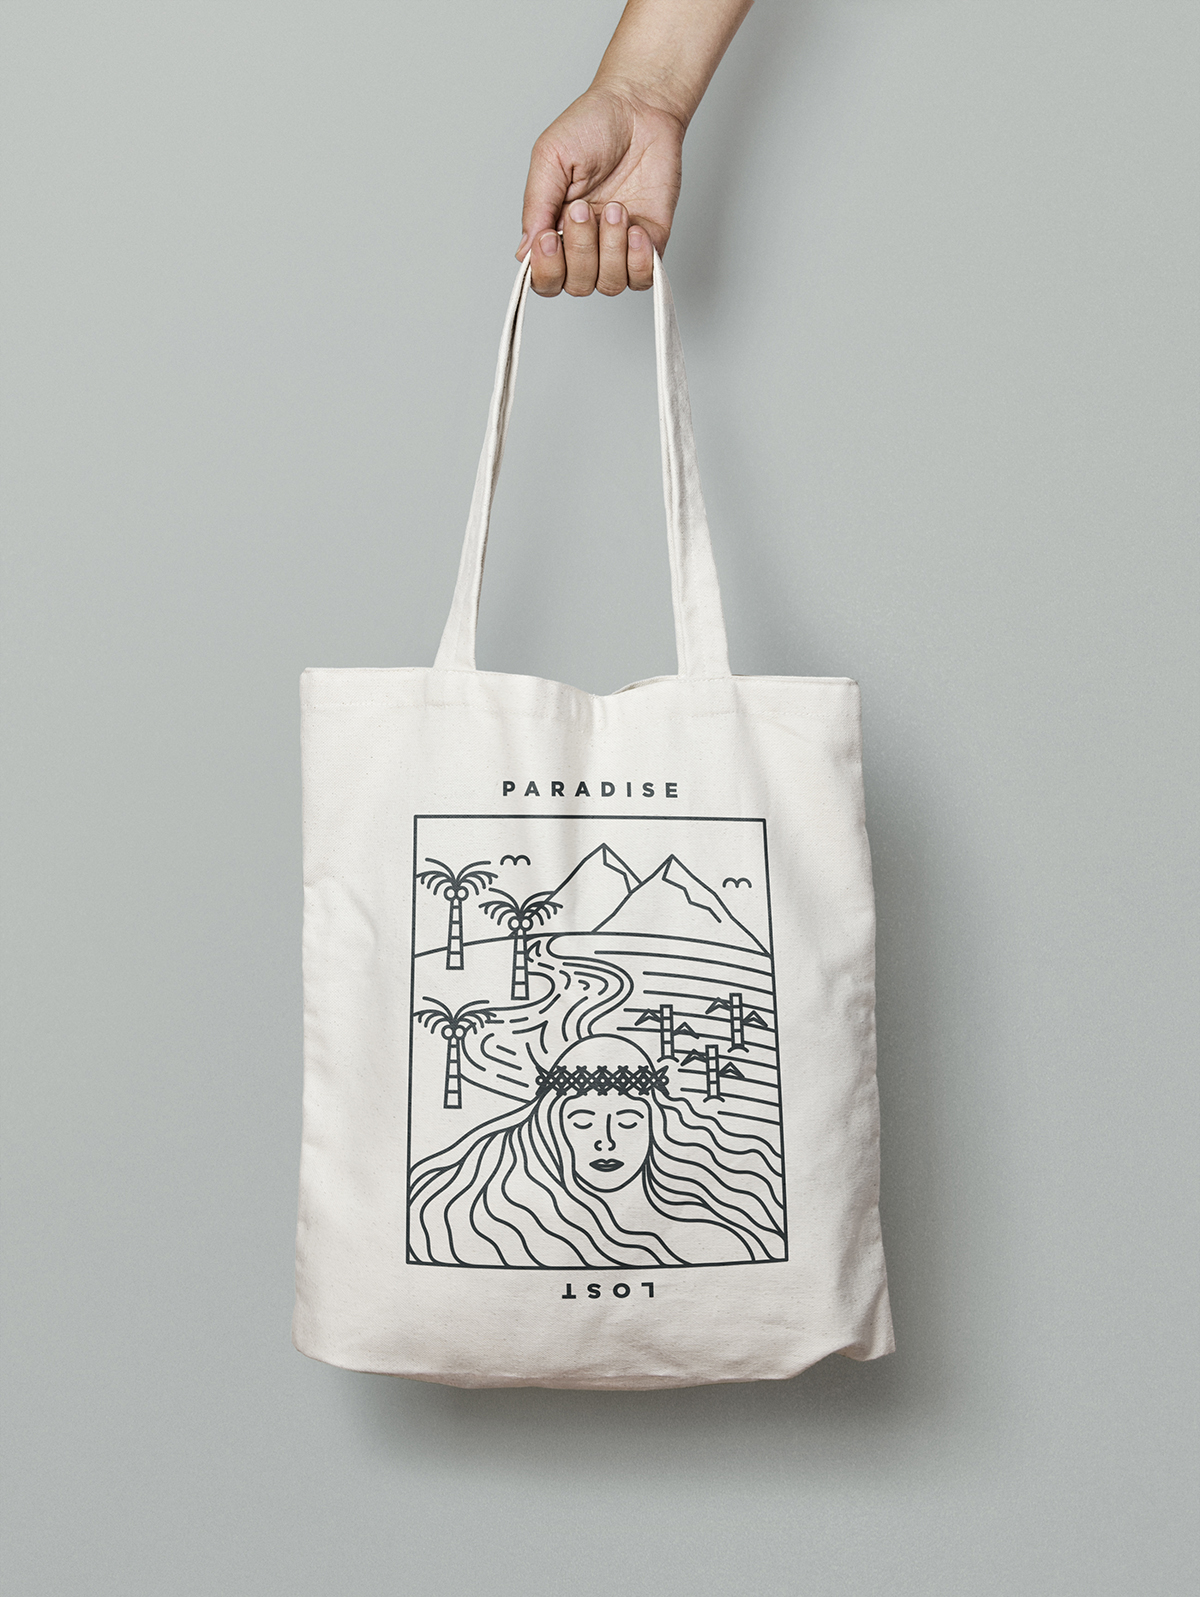 A portion of 'Paradise Lost' artwork printed on natural colored tote bag in black, shows woman in front of natural landscape with shoreline, palm trees, and mountains.